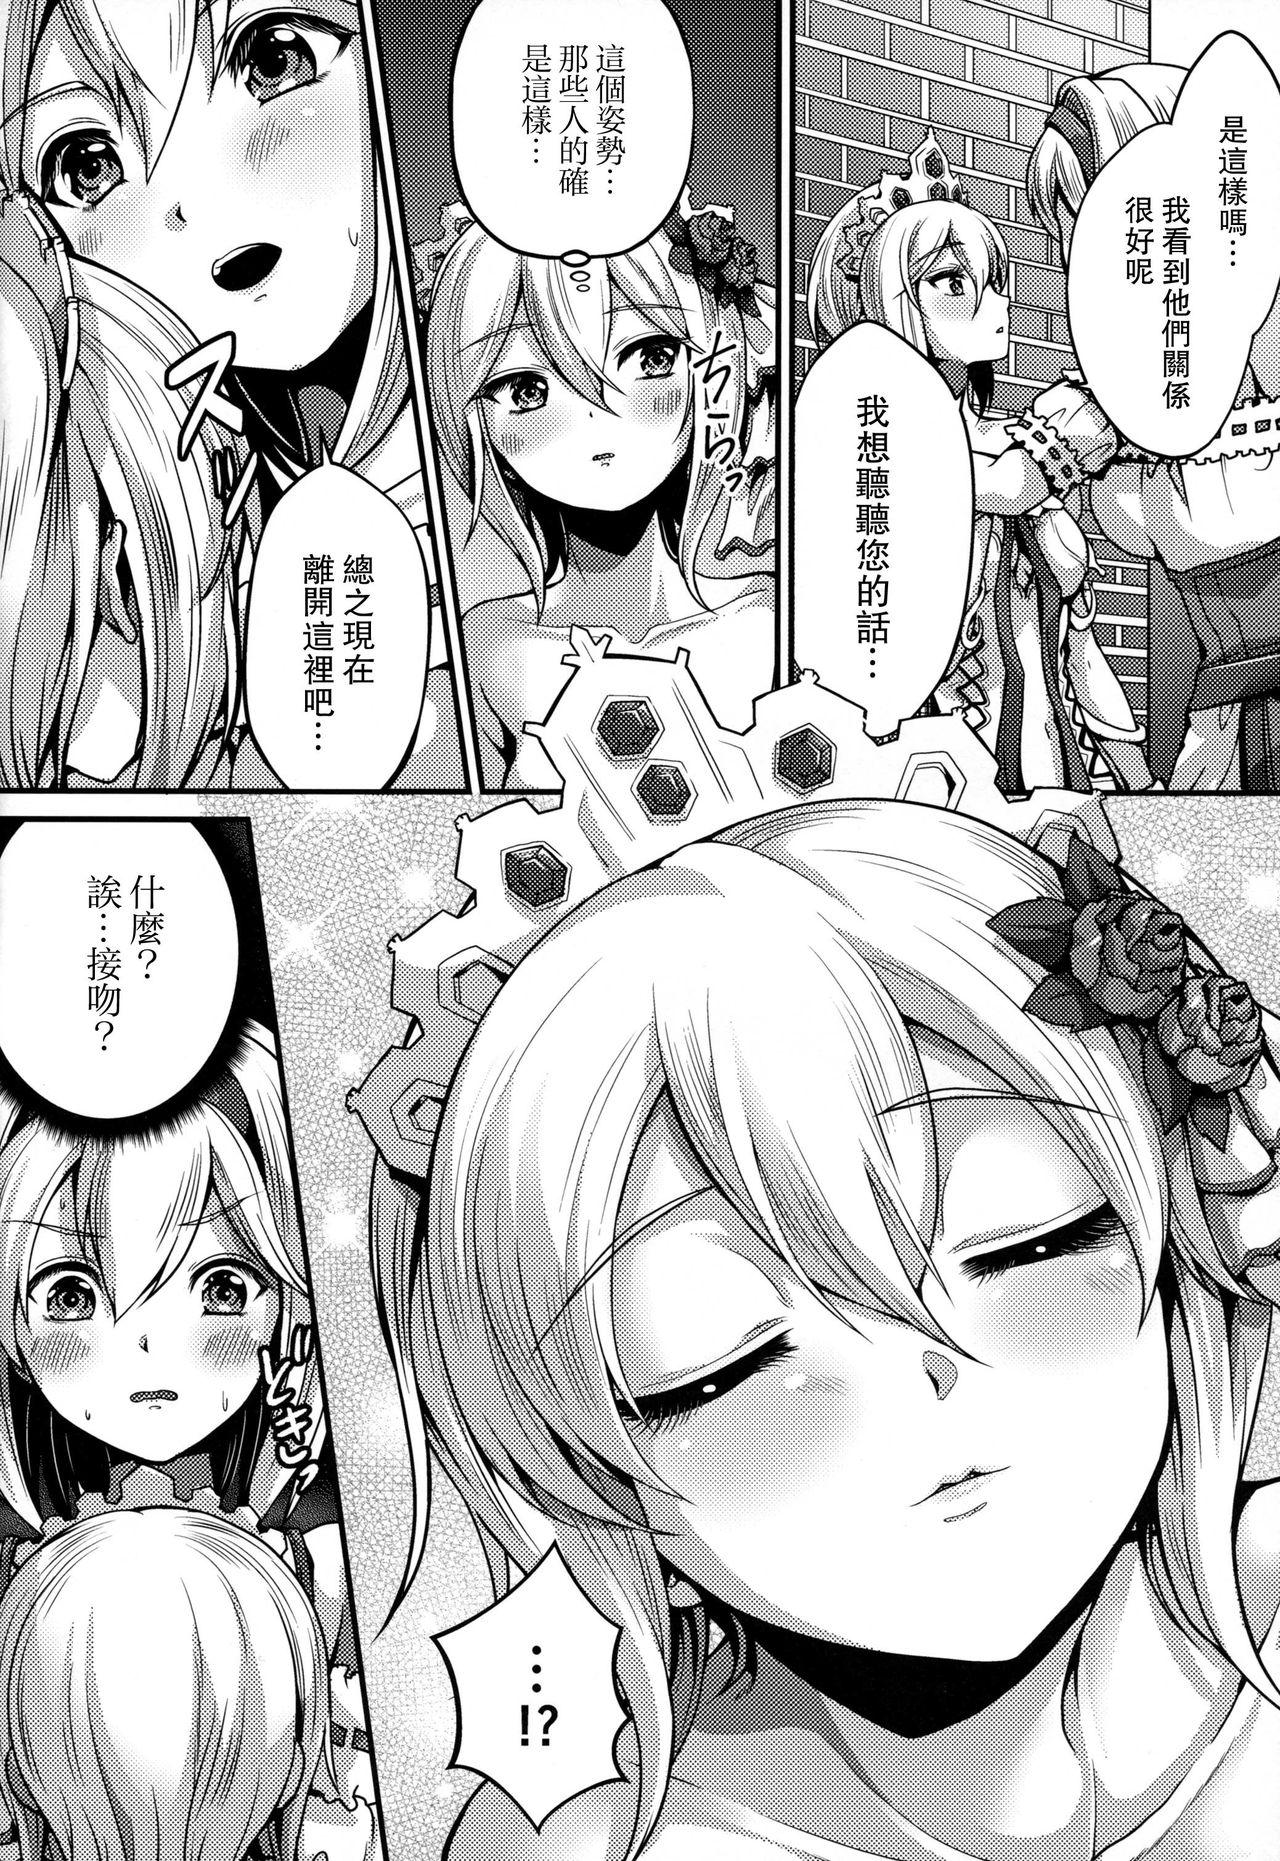 Sexy Princess is Seeking Unknown - Granblue fantasy Best Blowjob Ever - Page 5